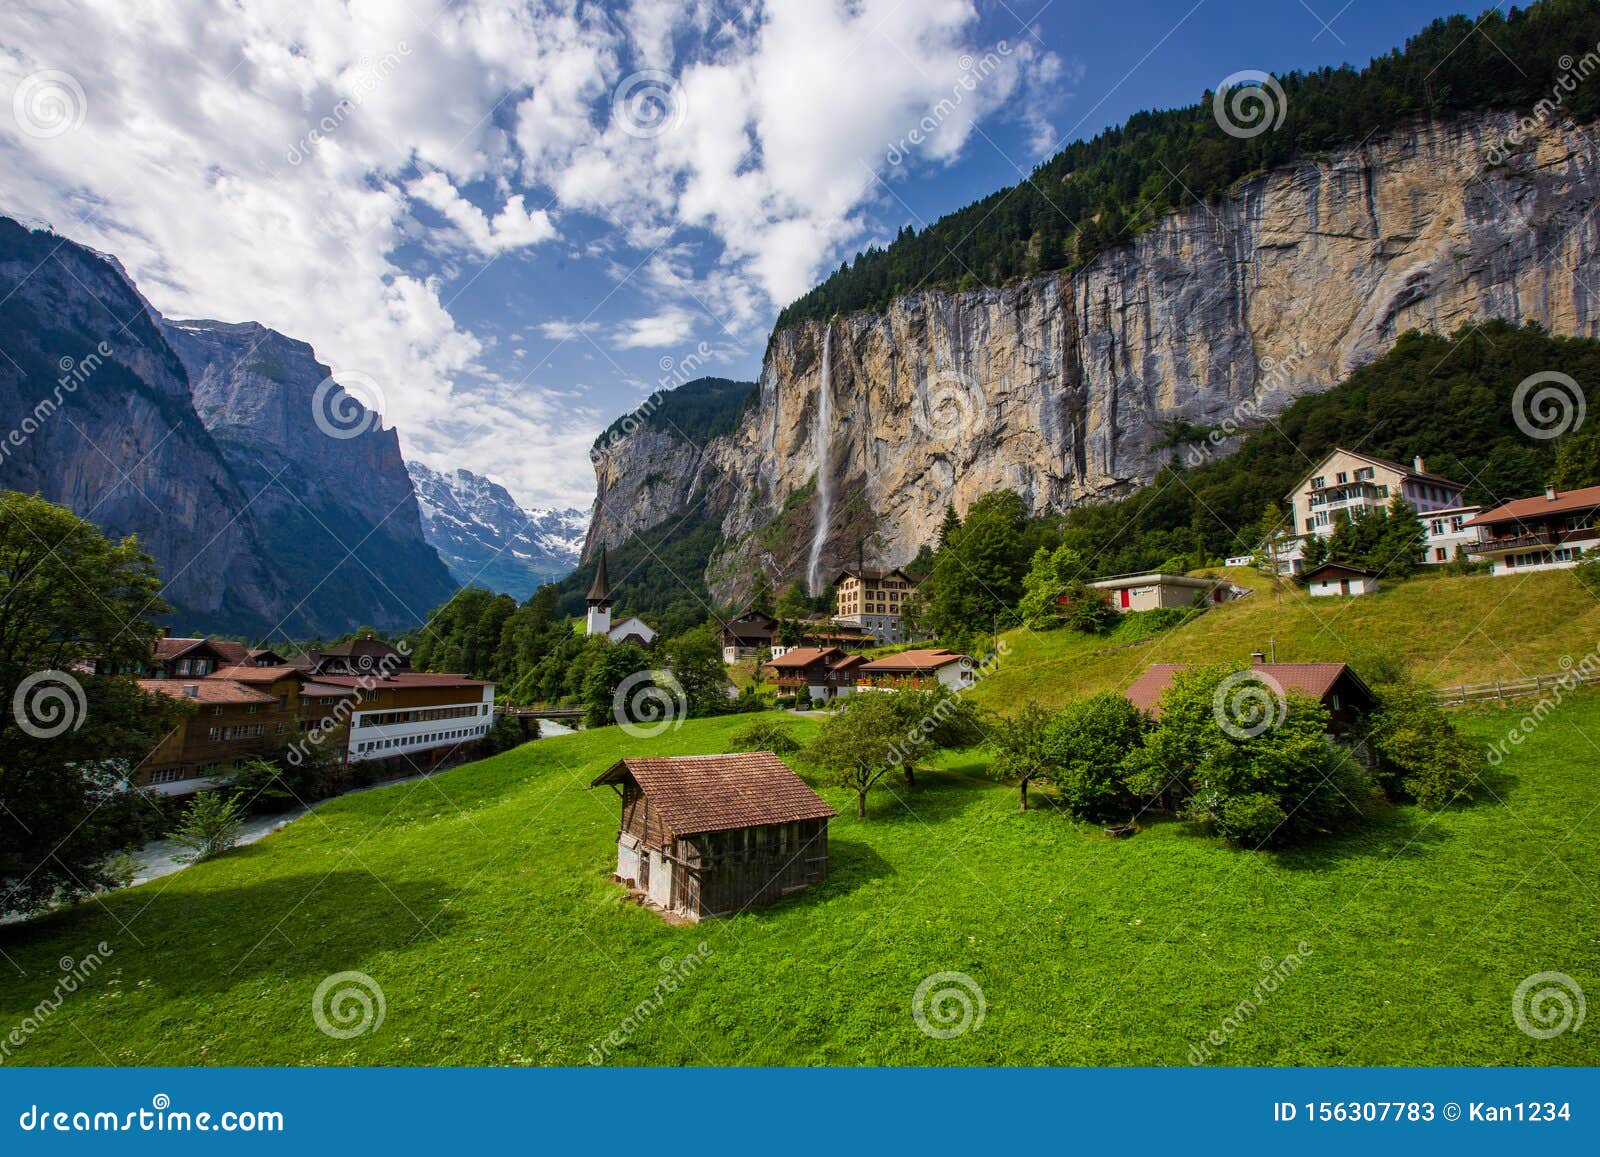 Faouse View of Lauterbrunnen Town in Swiss Alps Valley with Gorgeous